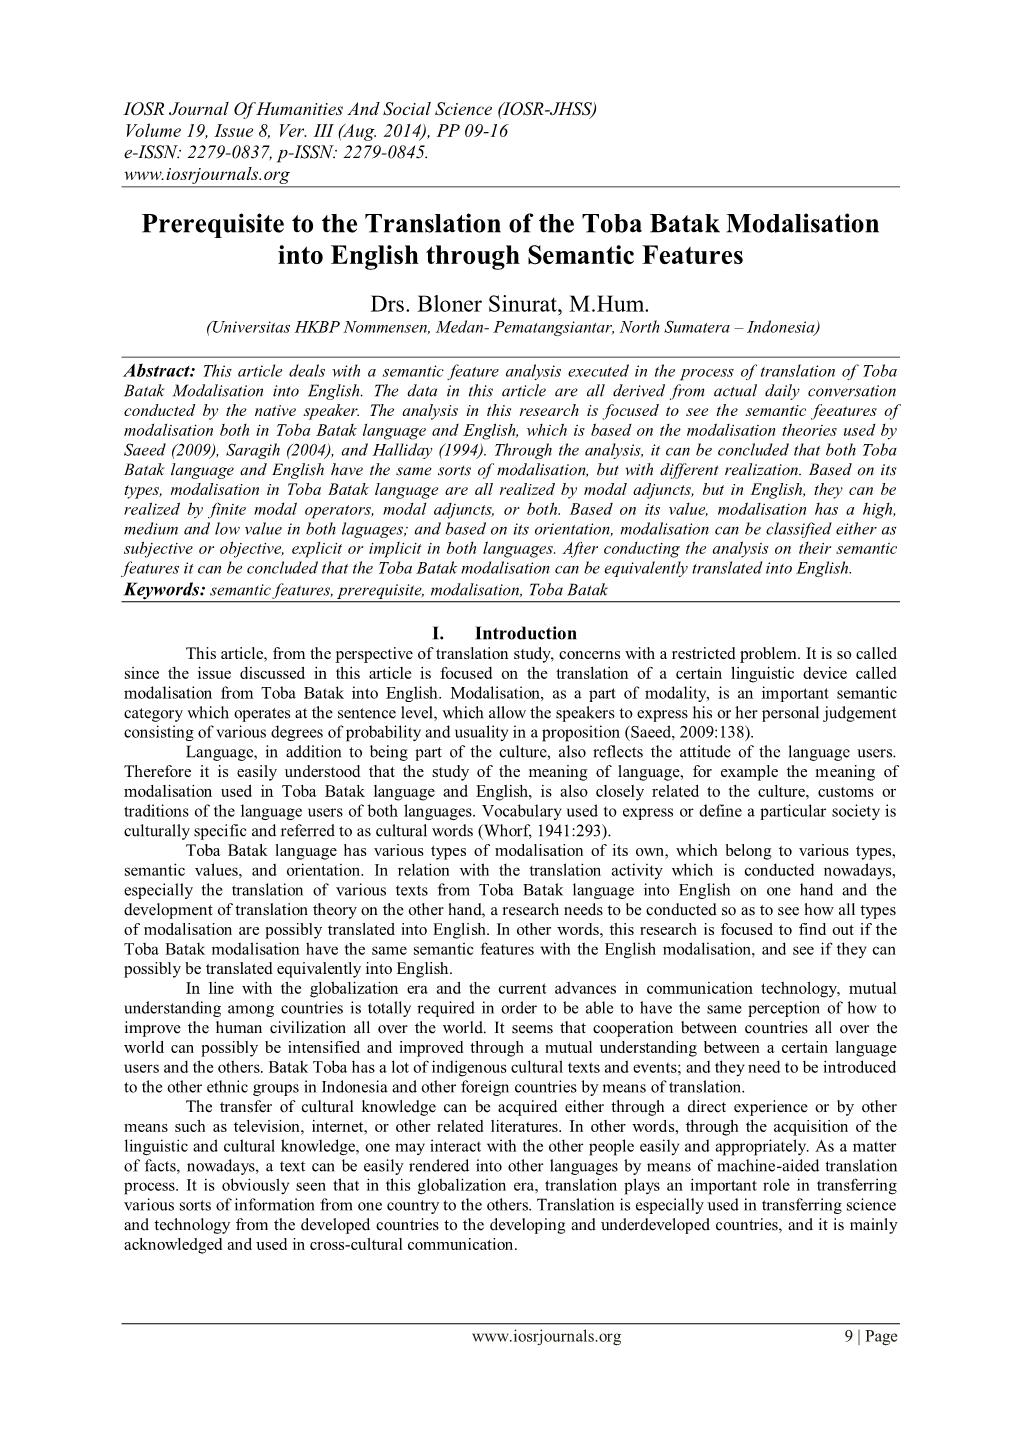 Prerequisite to the Translation of the Toba Batak Modalisation Into English Through Semantic Features